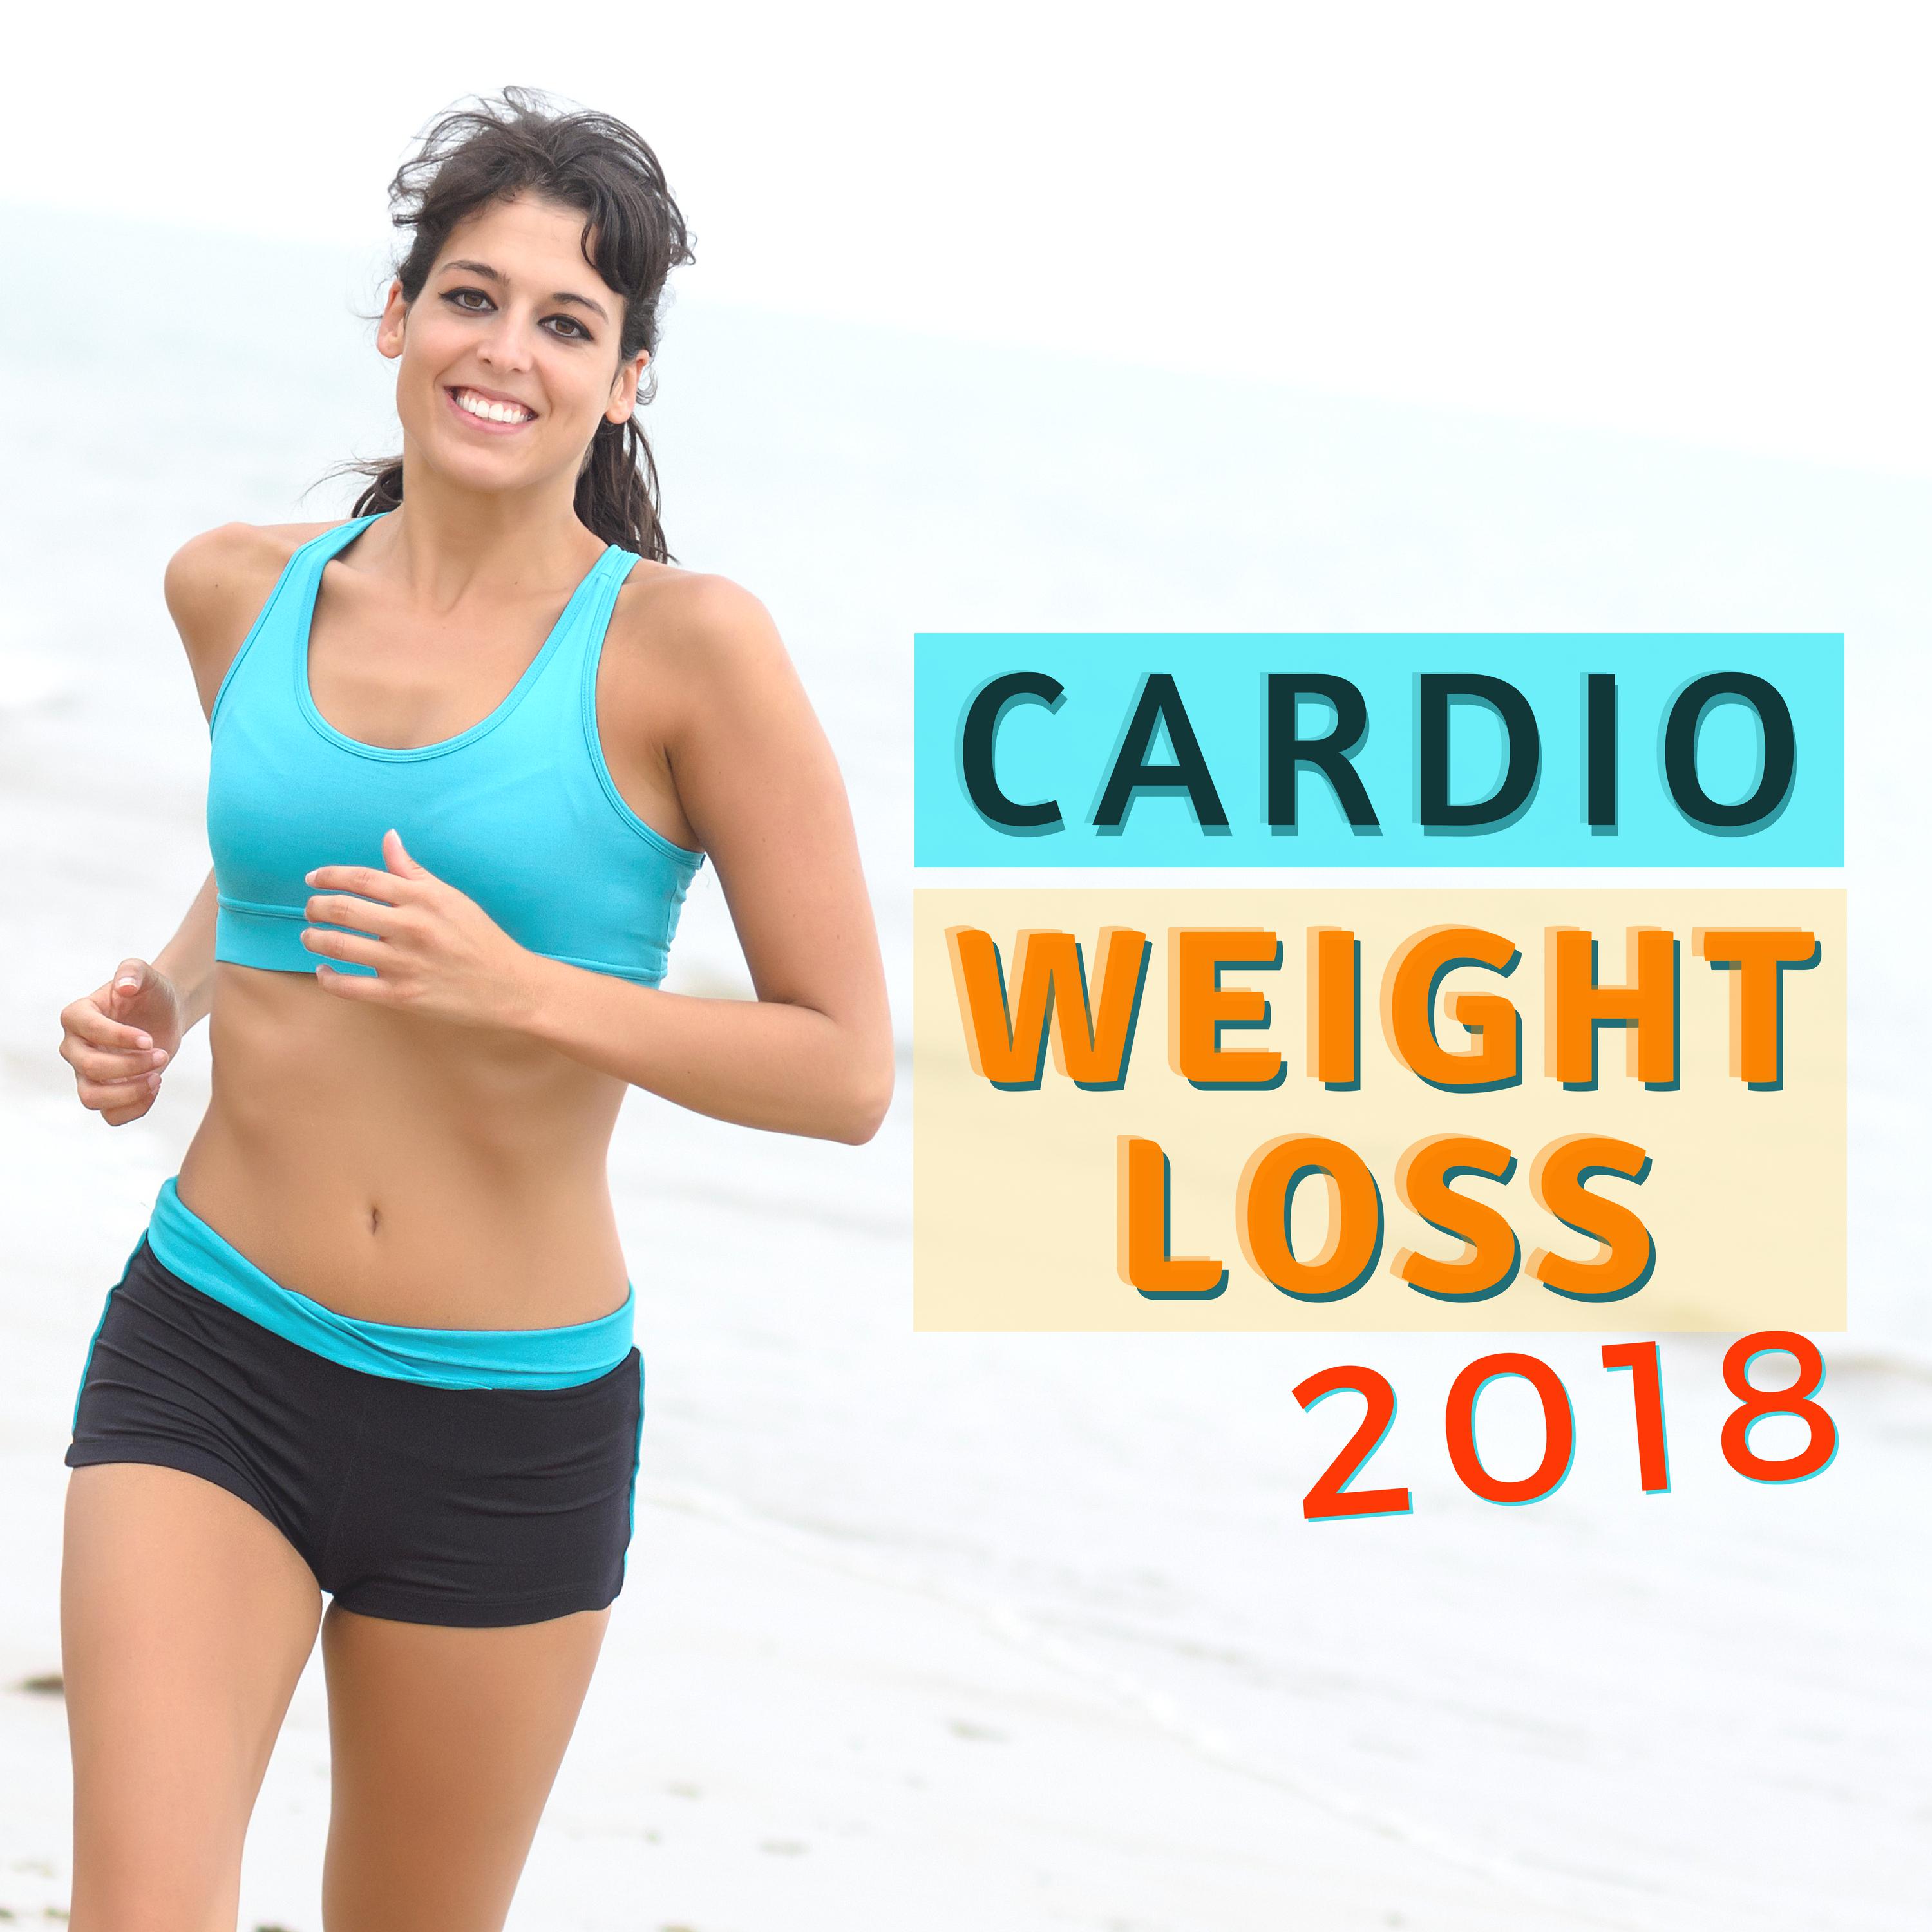 Cardio Weight Loss 2018 - Best Working Out Music for Pilates, Running & Walking